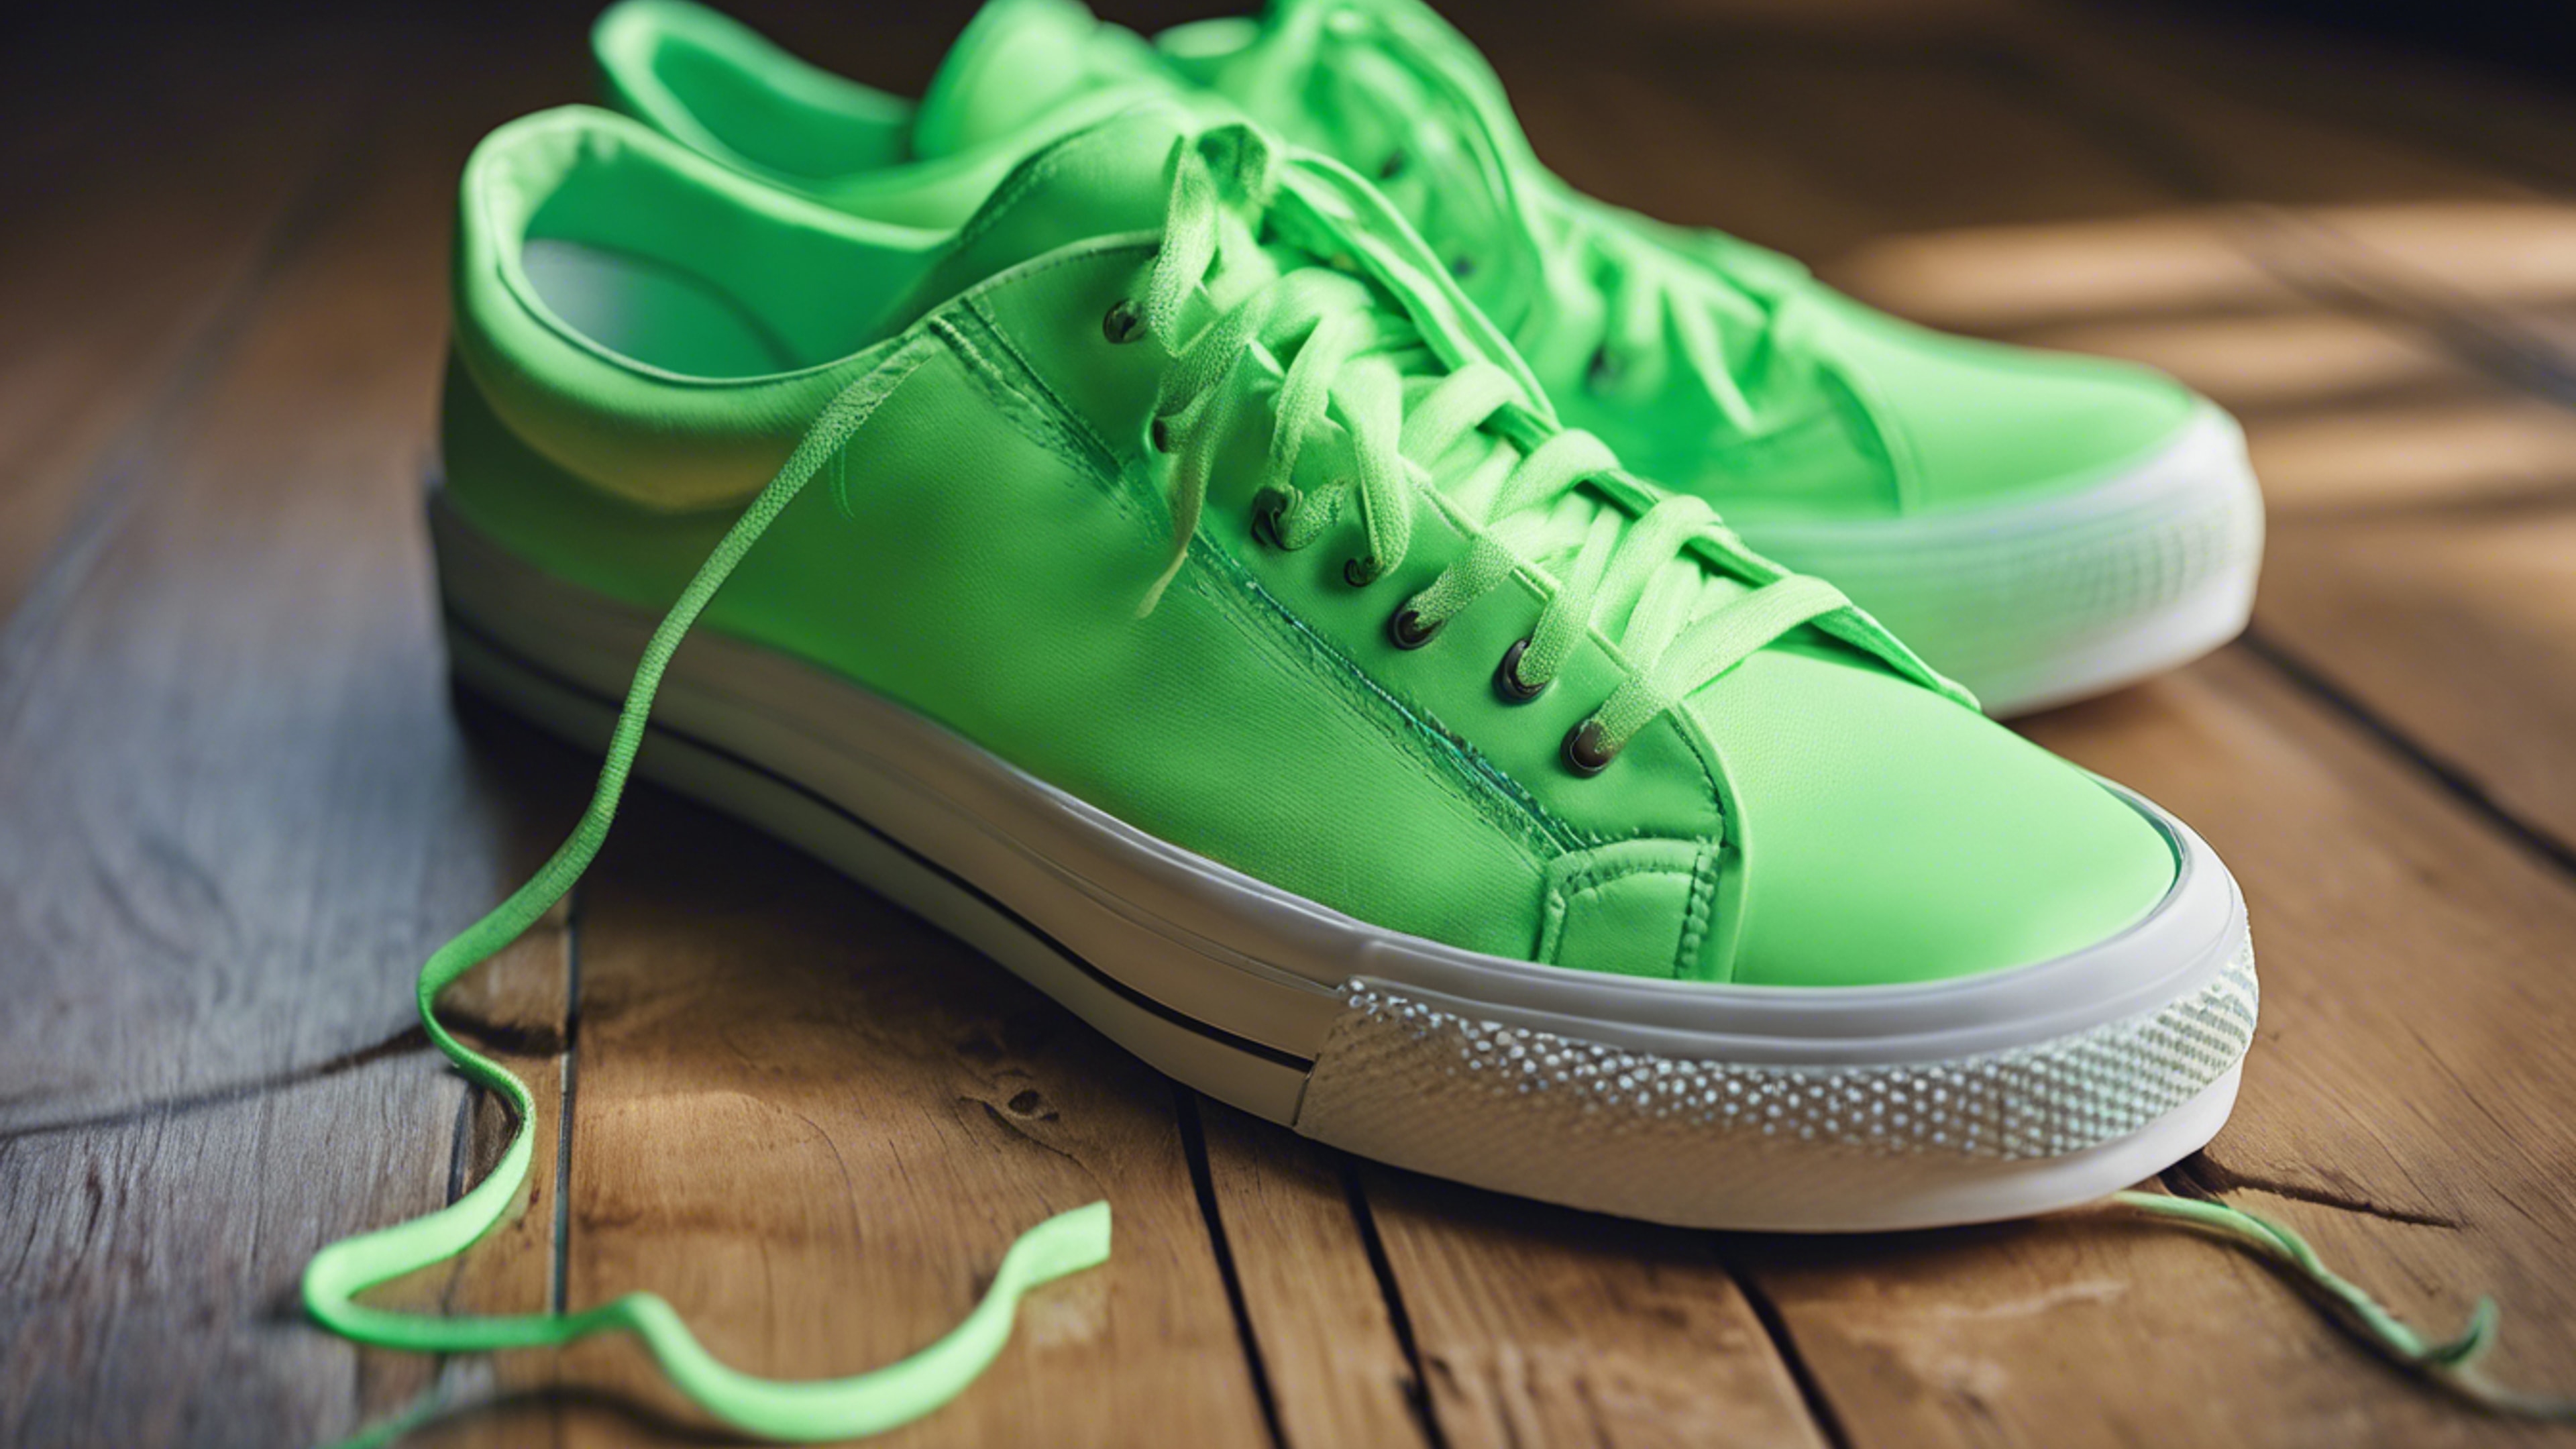 A pair of cool neon green sneakers on a wooden floor. Wallpaper[ff0ca47ab0724ffdb6ad]